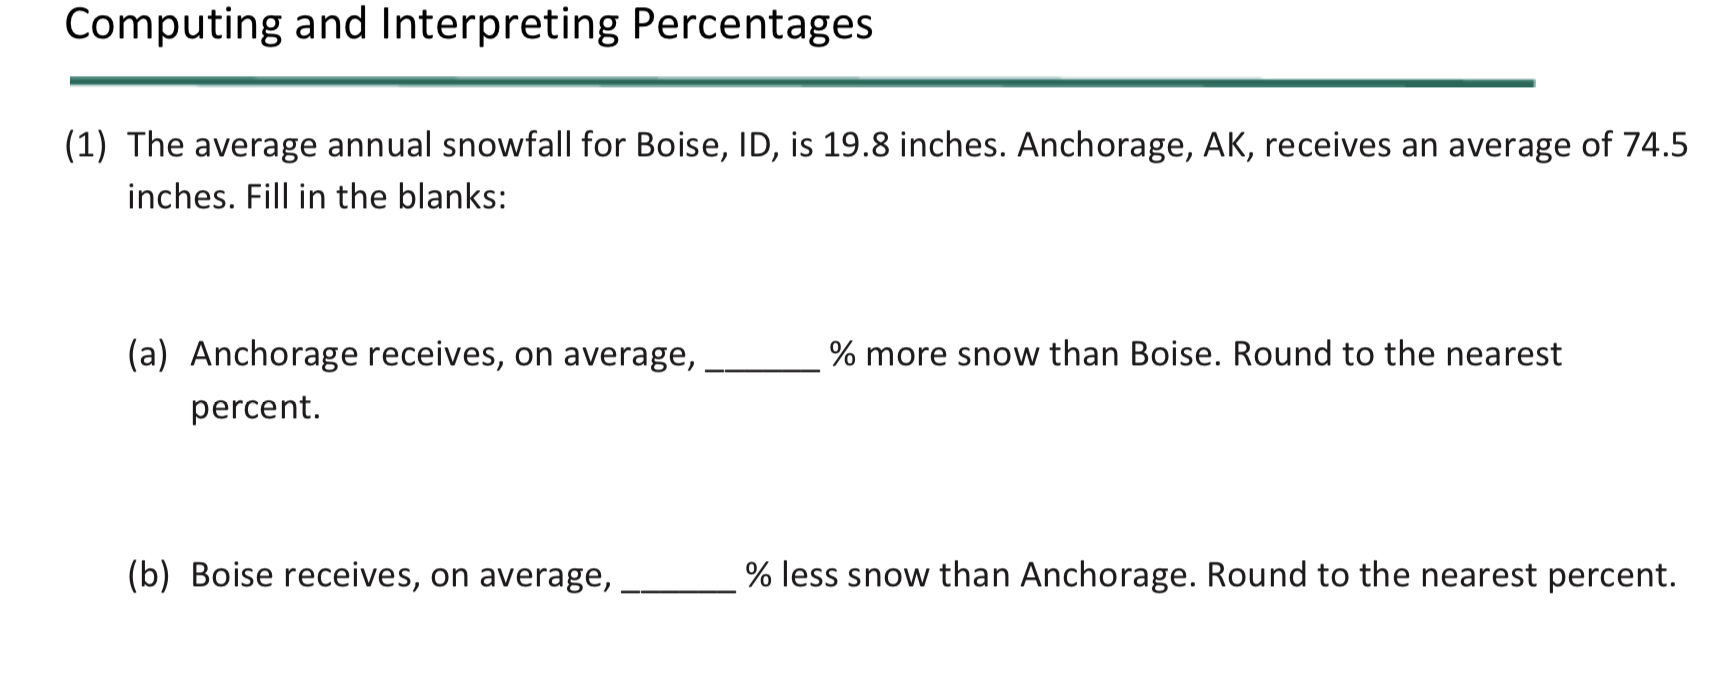 Computing and Interpreting Percentages
(1) The average annual snowfall for Boise, ID, is 19.8 inches. Anchorage, AK, receives an average of 74.5
inches. Fill in the blanks:
(a) Anchorage receives, on average,
% more snow than Boise. Round to the nearest
percent.
(b) Boise receives, on average,
% less snow than Anchorage. Round to the nearest percent.
